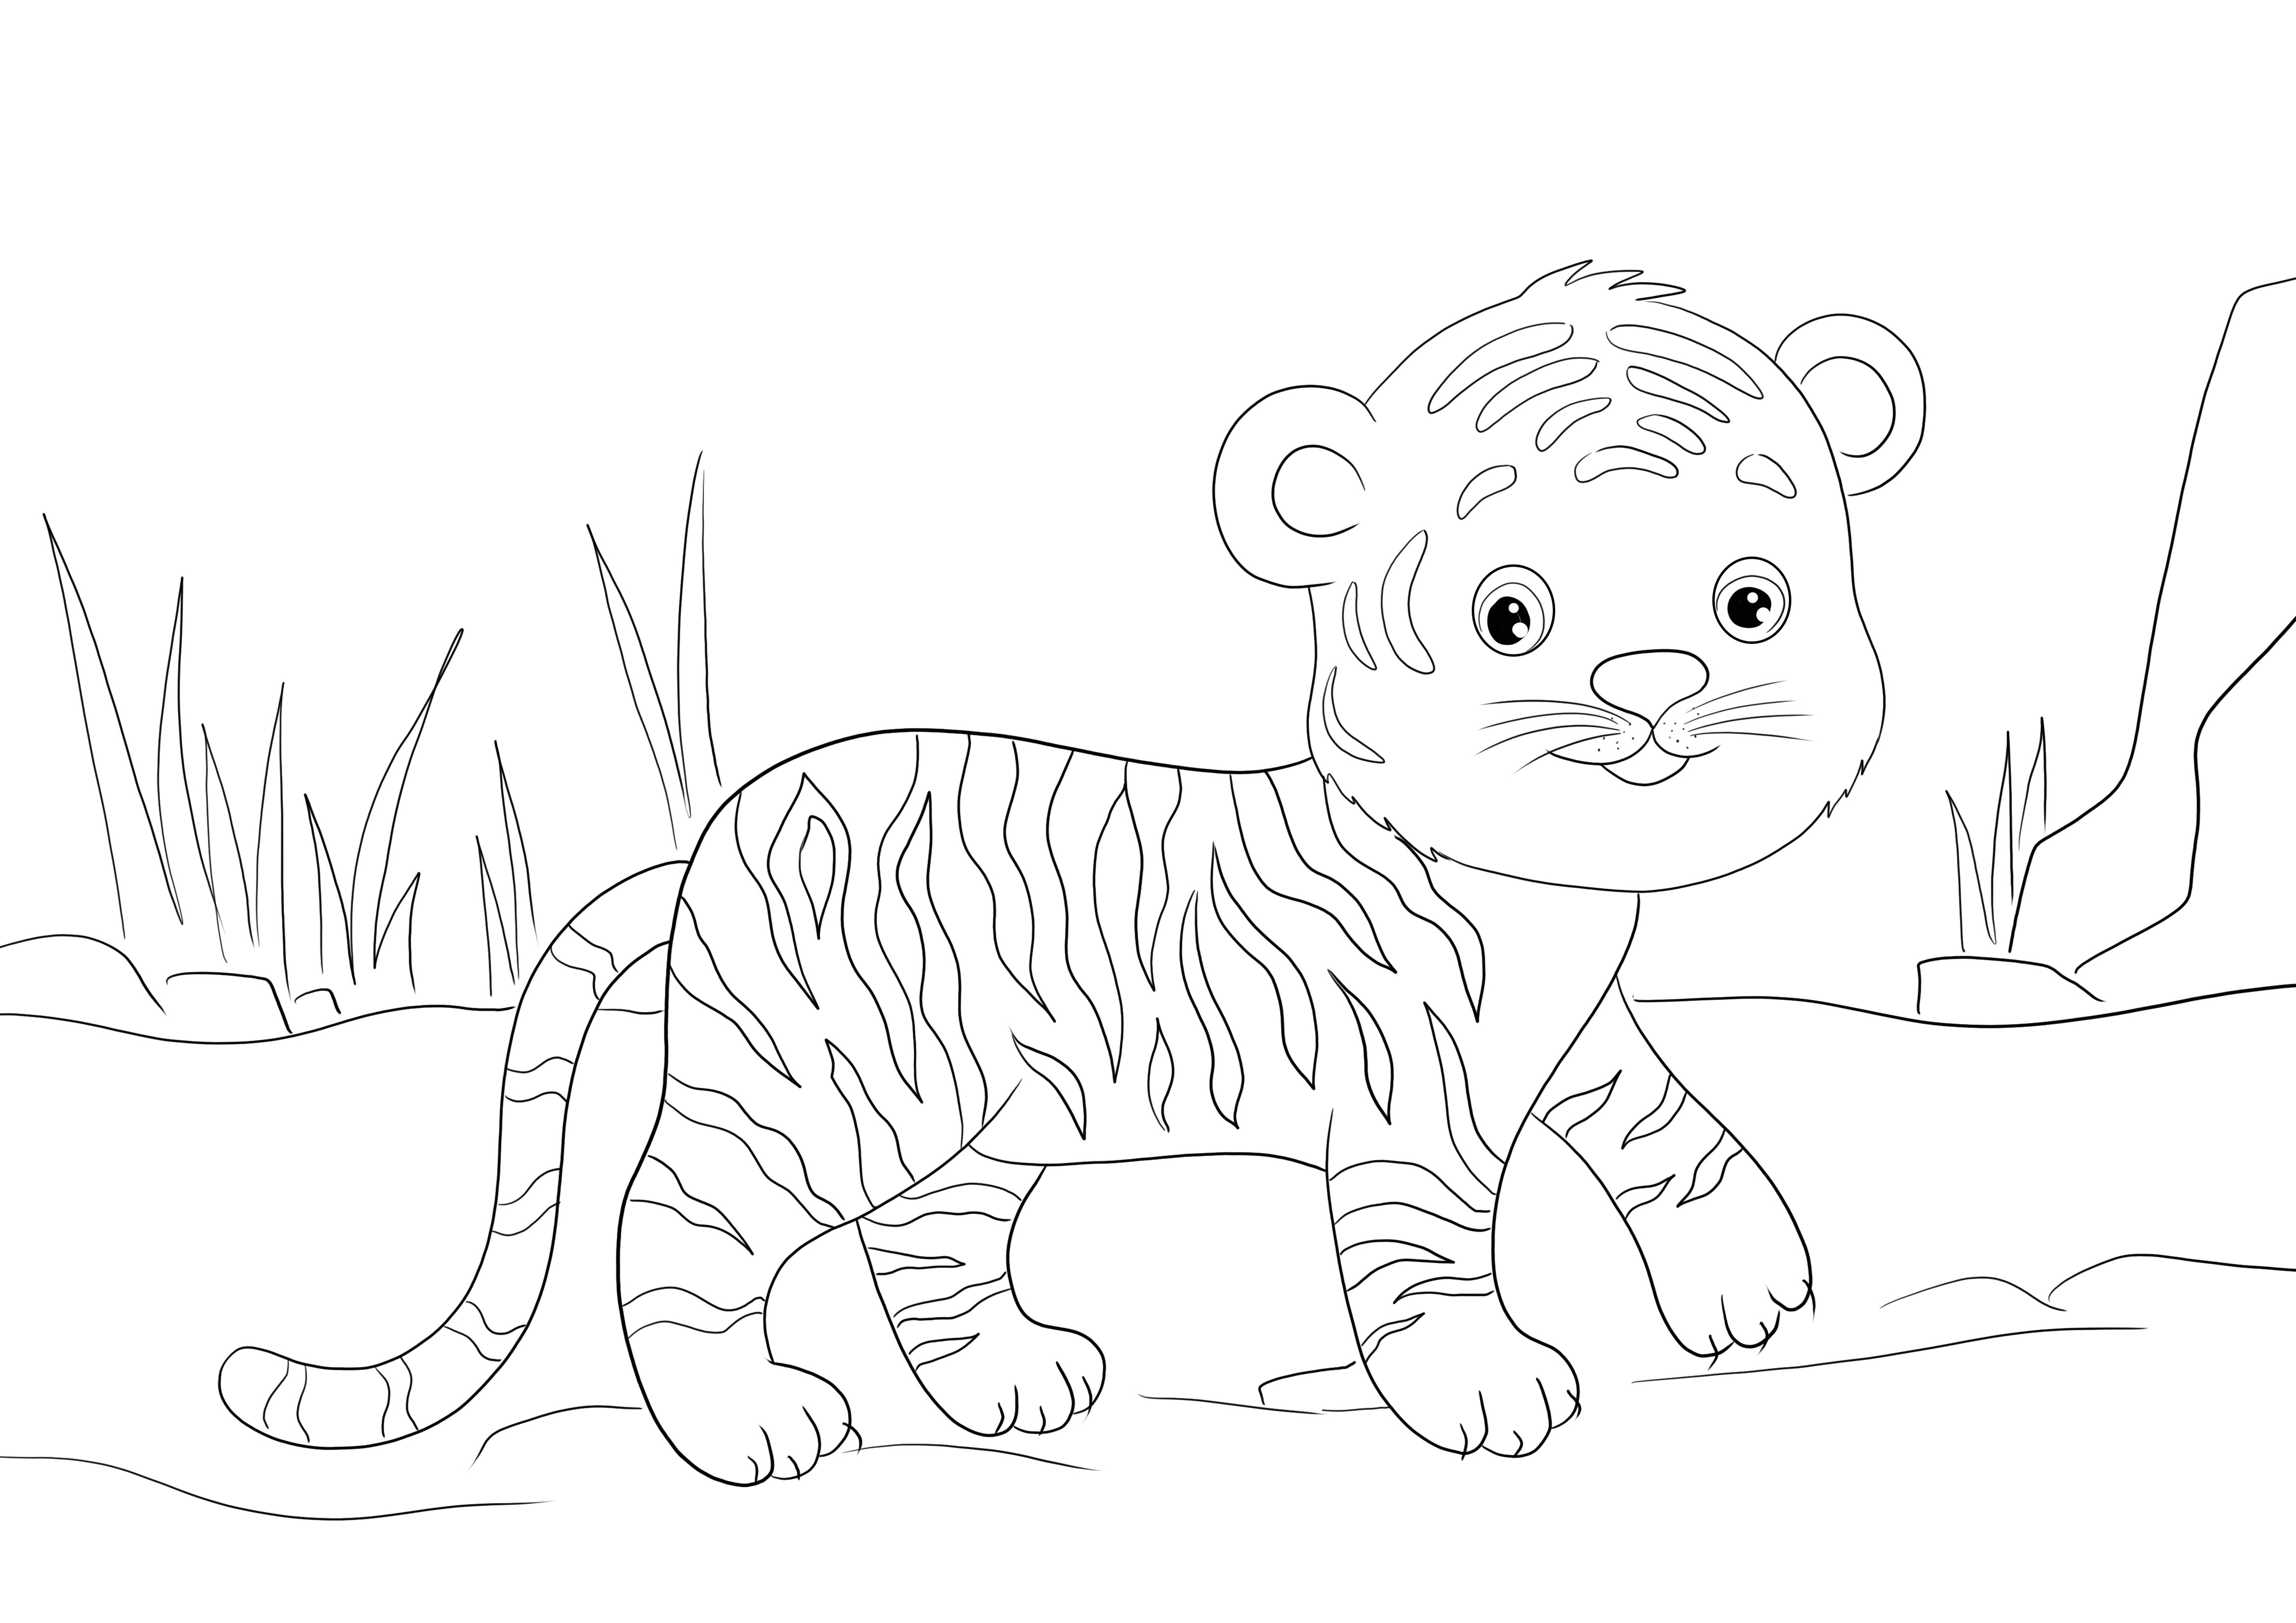 Simple and easy free coloring sheet of a Tiger cub to download